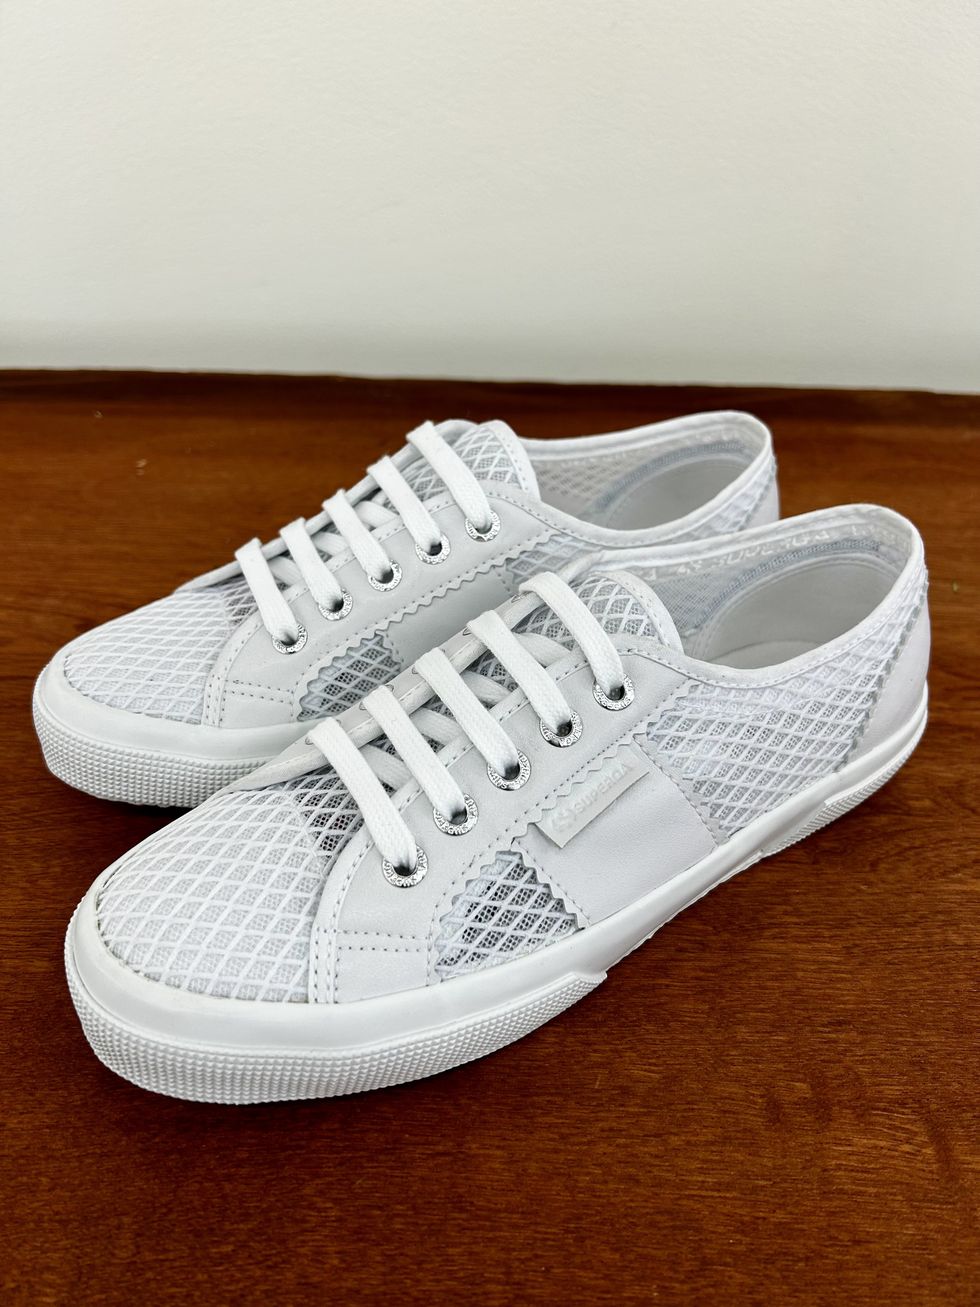 a pair of white sneakers